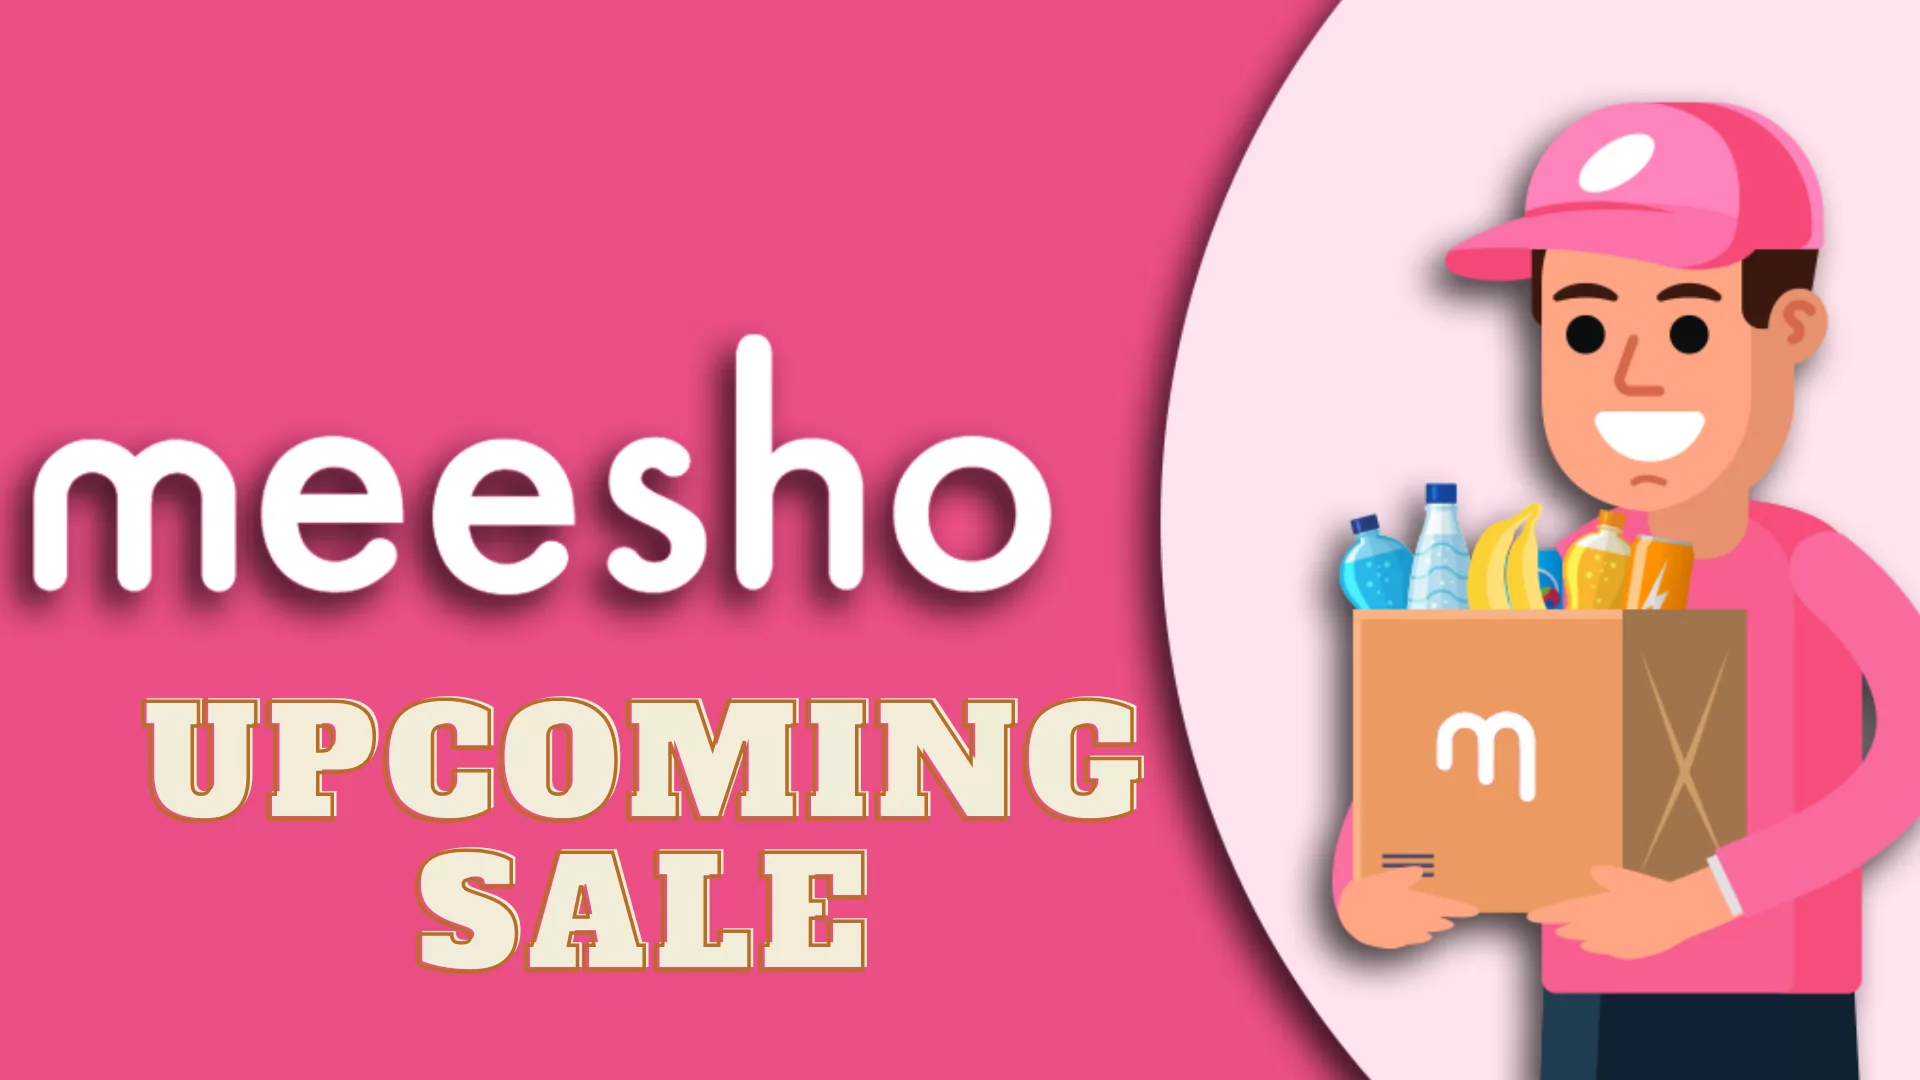 Meesho Upcoming Sale: Upto 80% OFF on All Categories